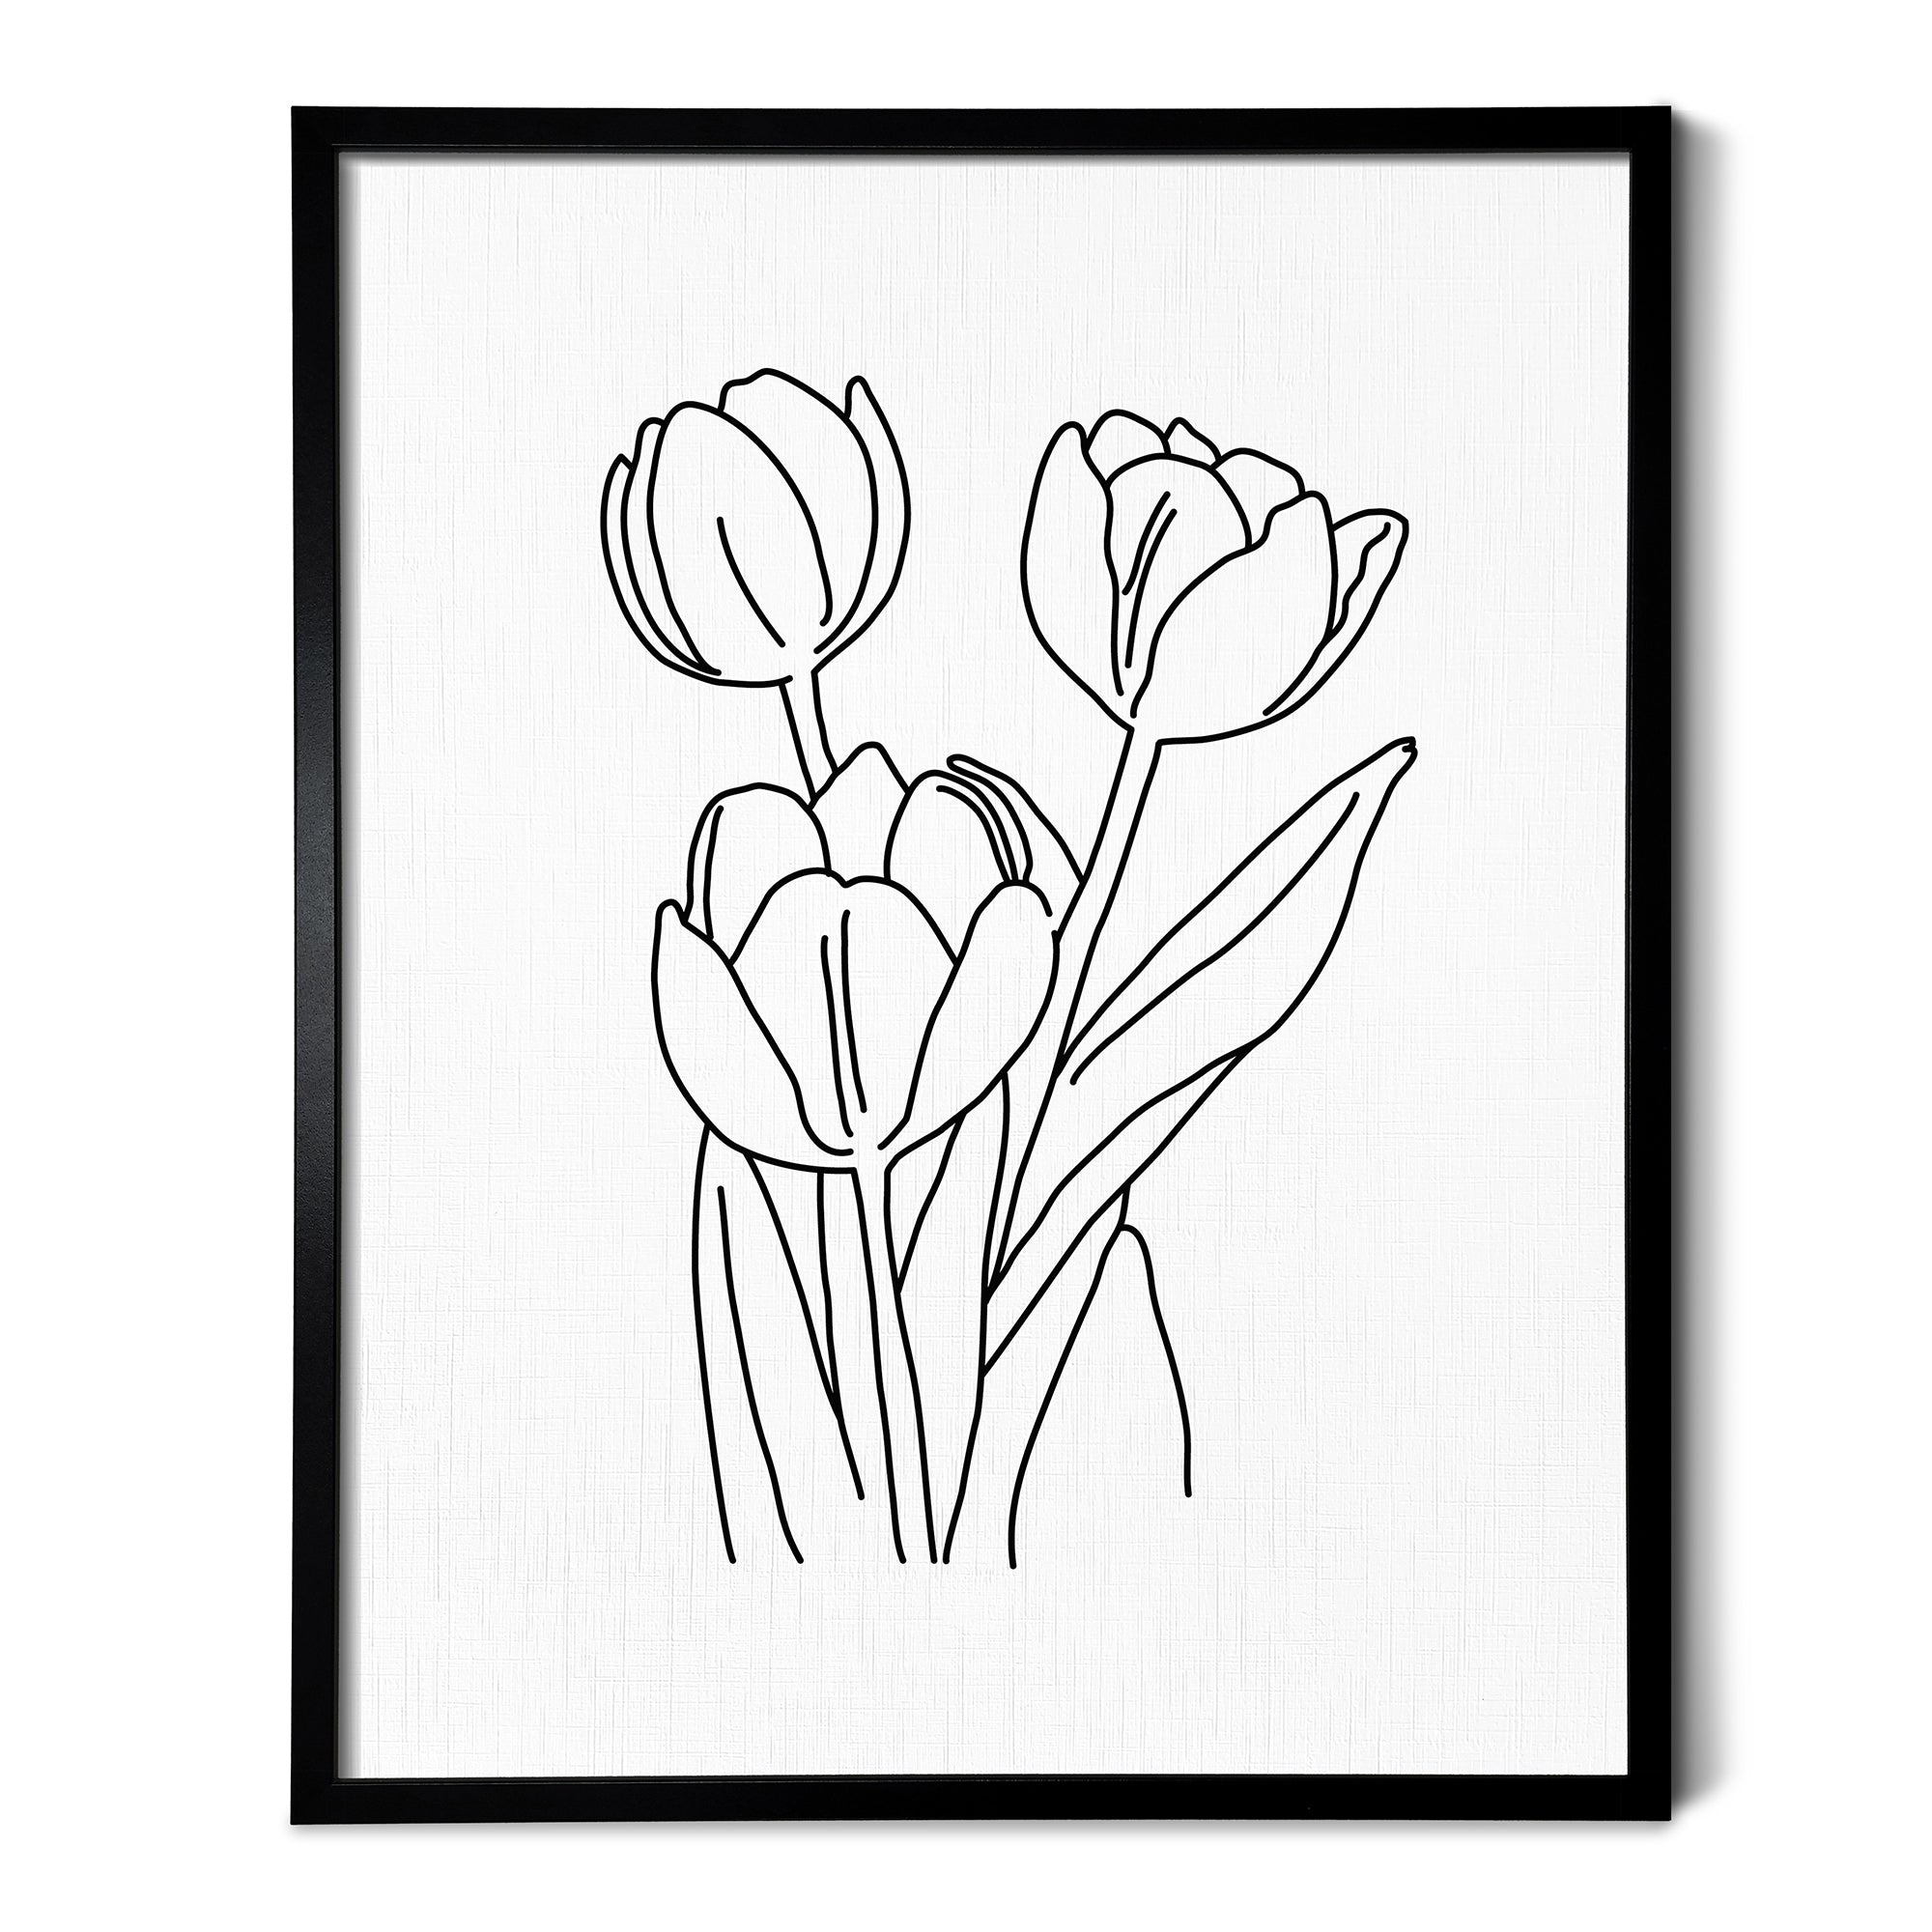 A line art drawing of a Tulip Flower on white linen paper in a thin black picture frame